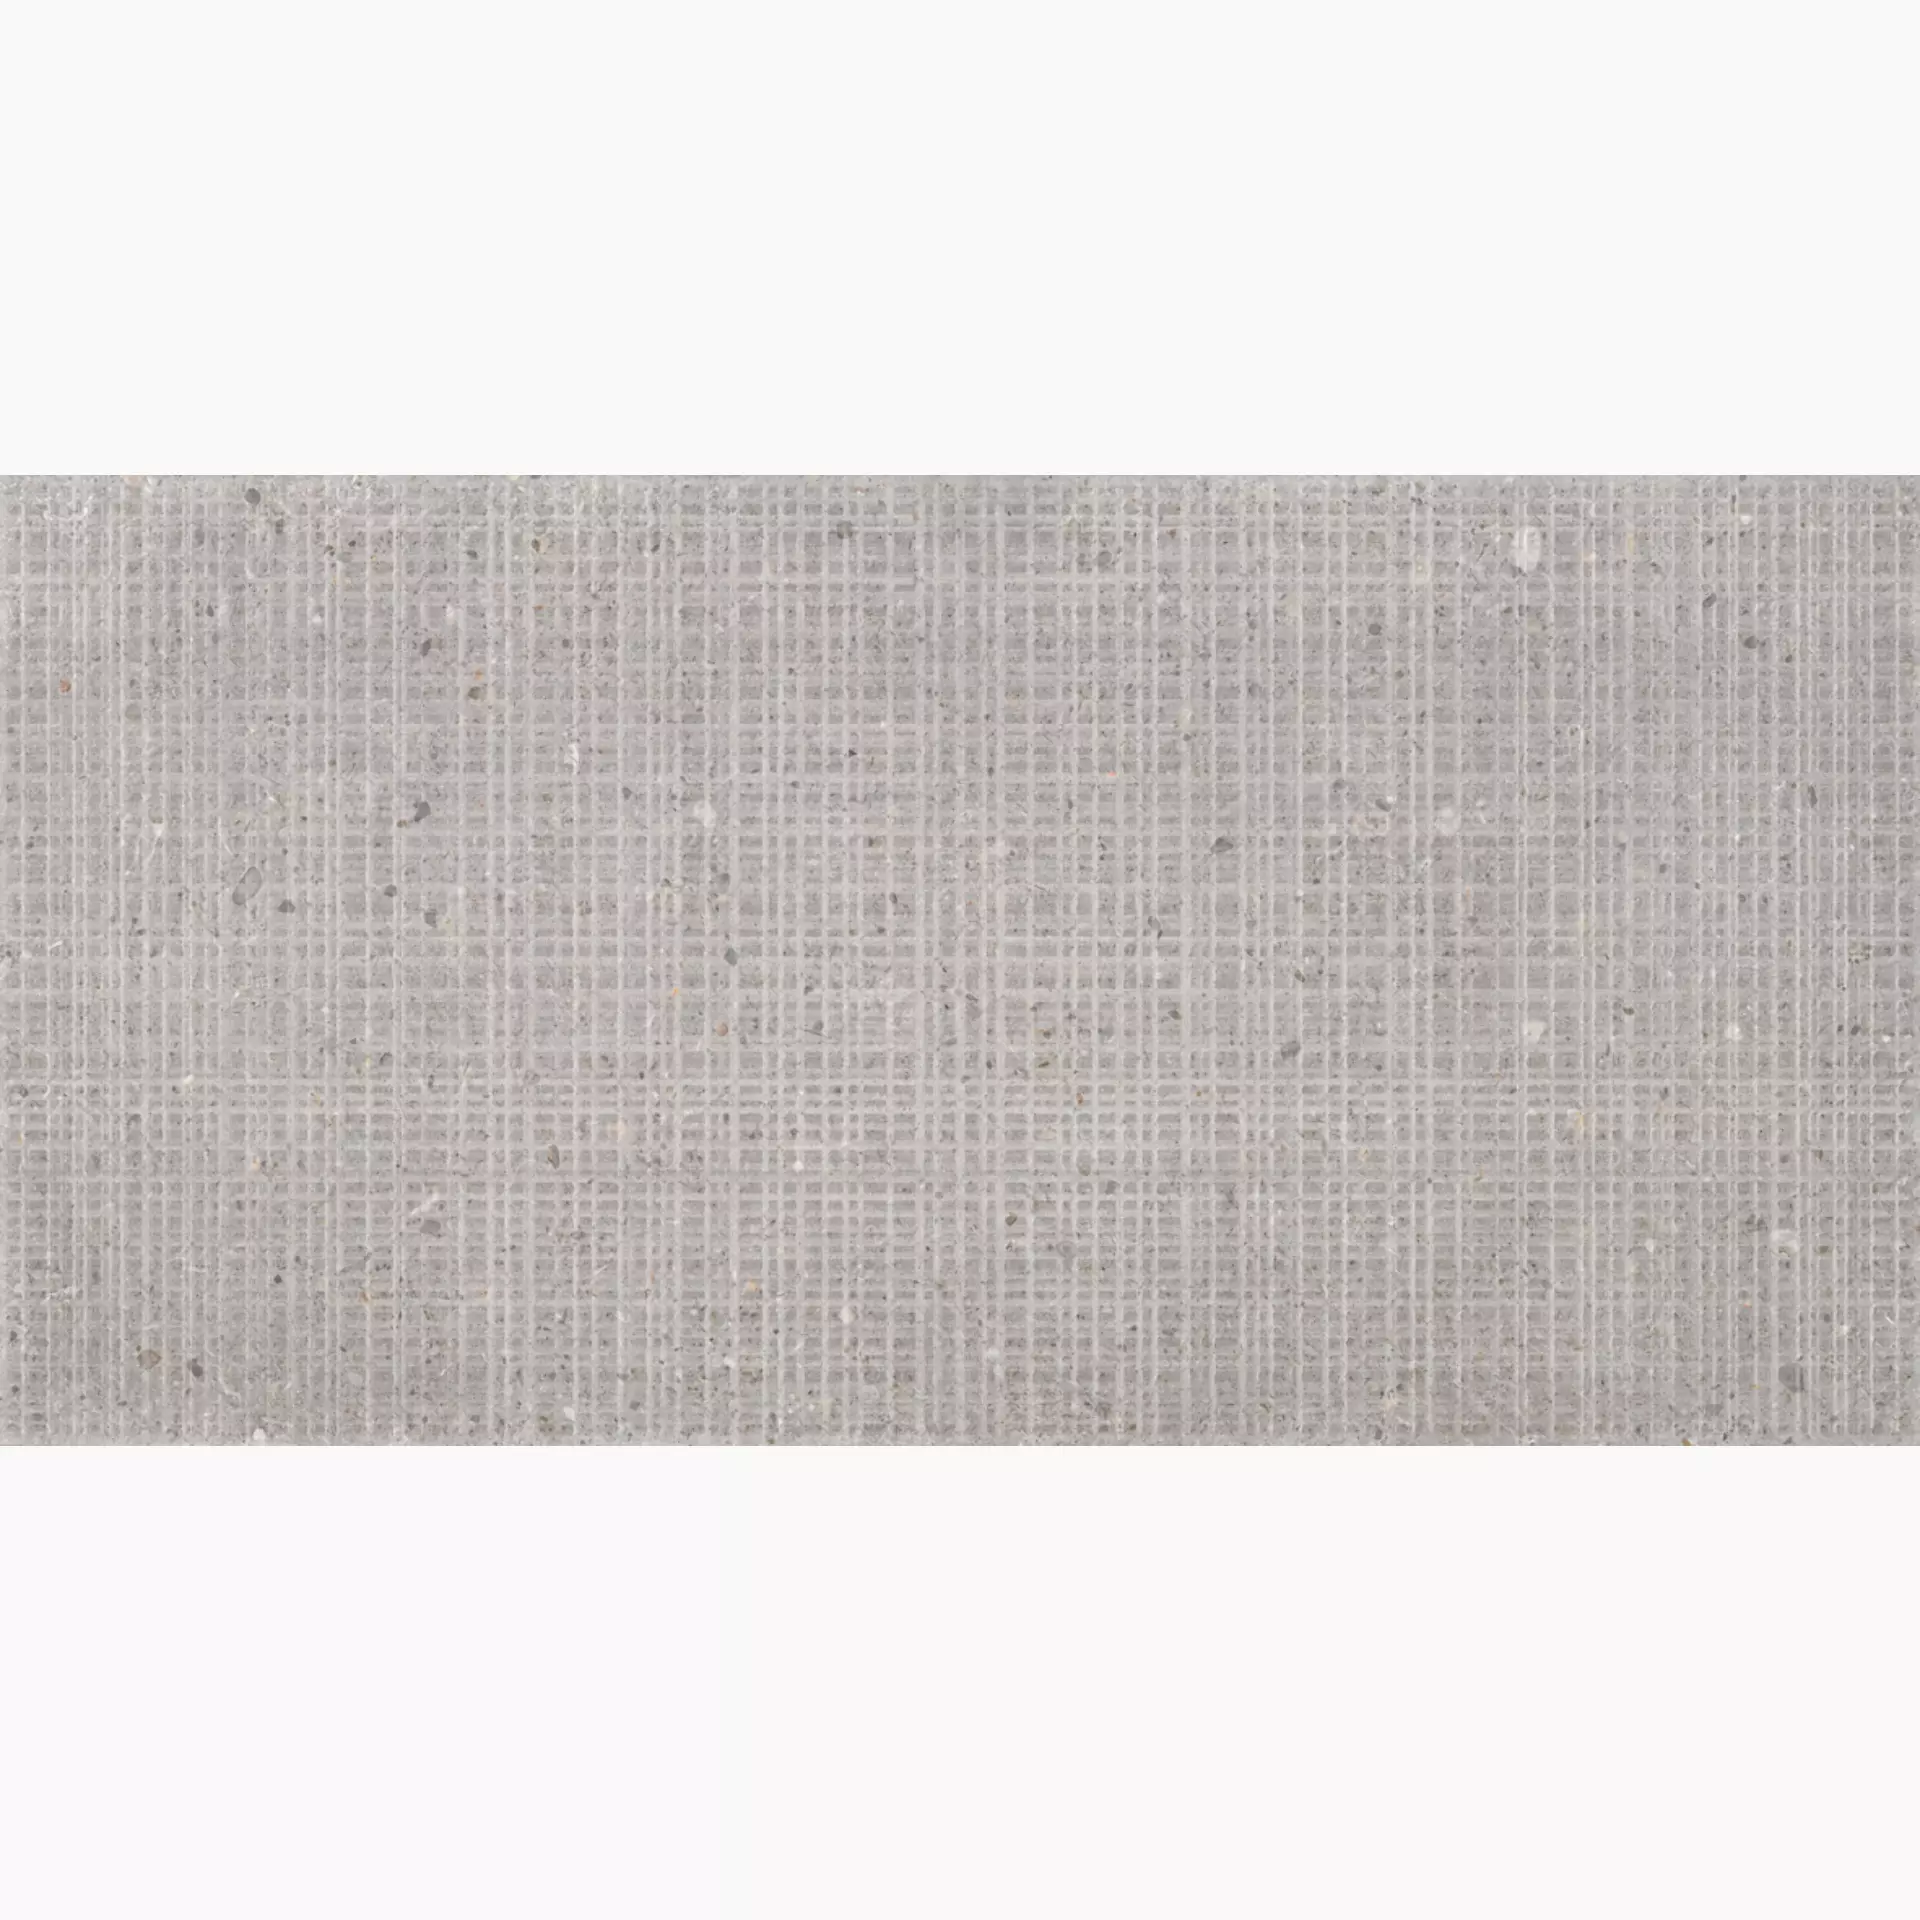 Provenza Ego Grigio Naturale Trame EGR3 60x120cm rectified 9,5mm